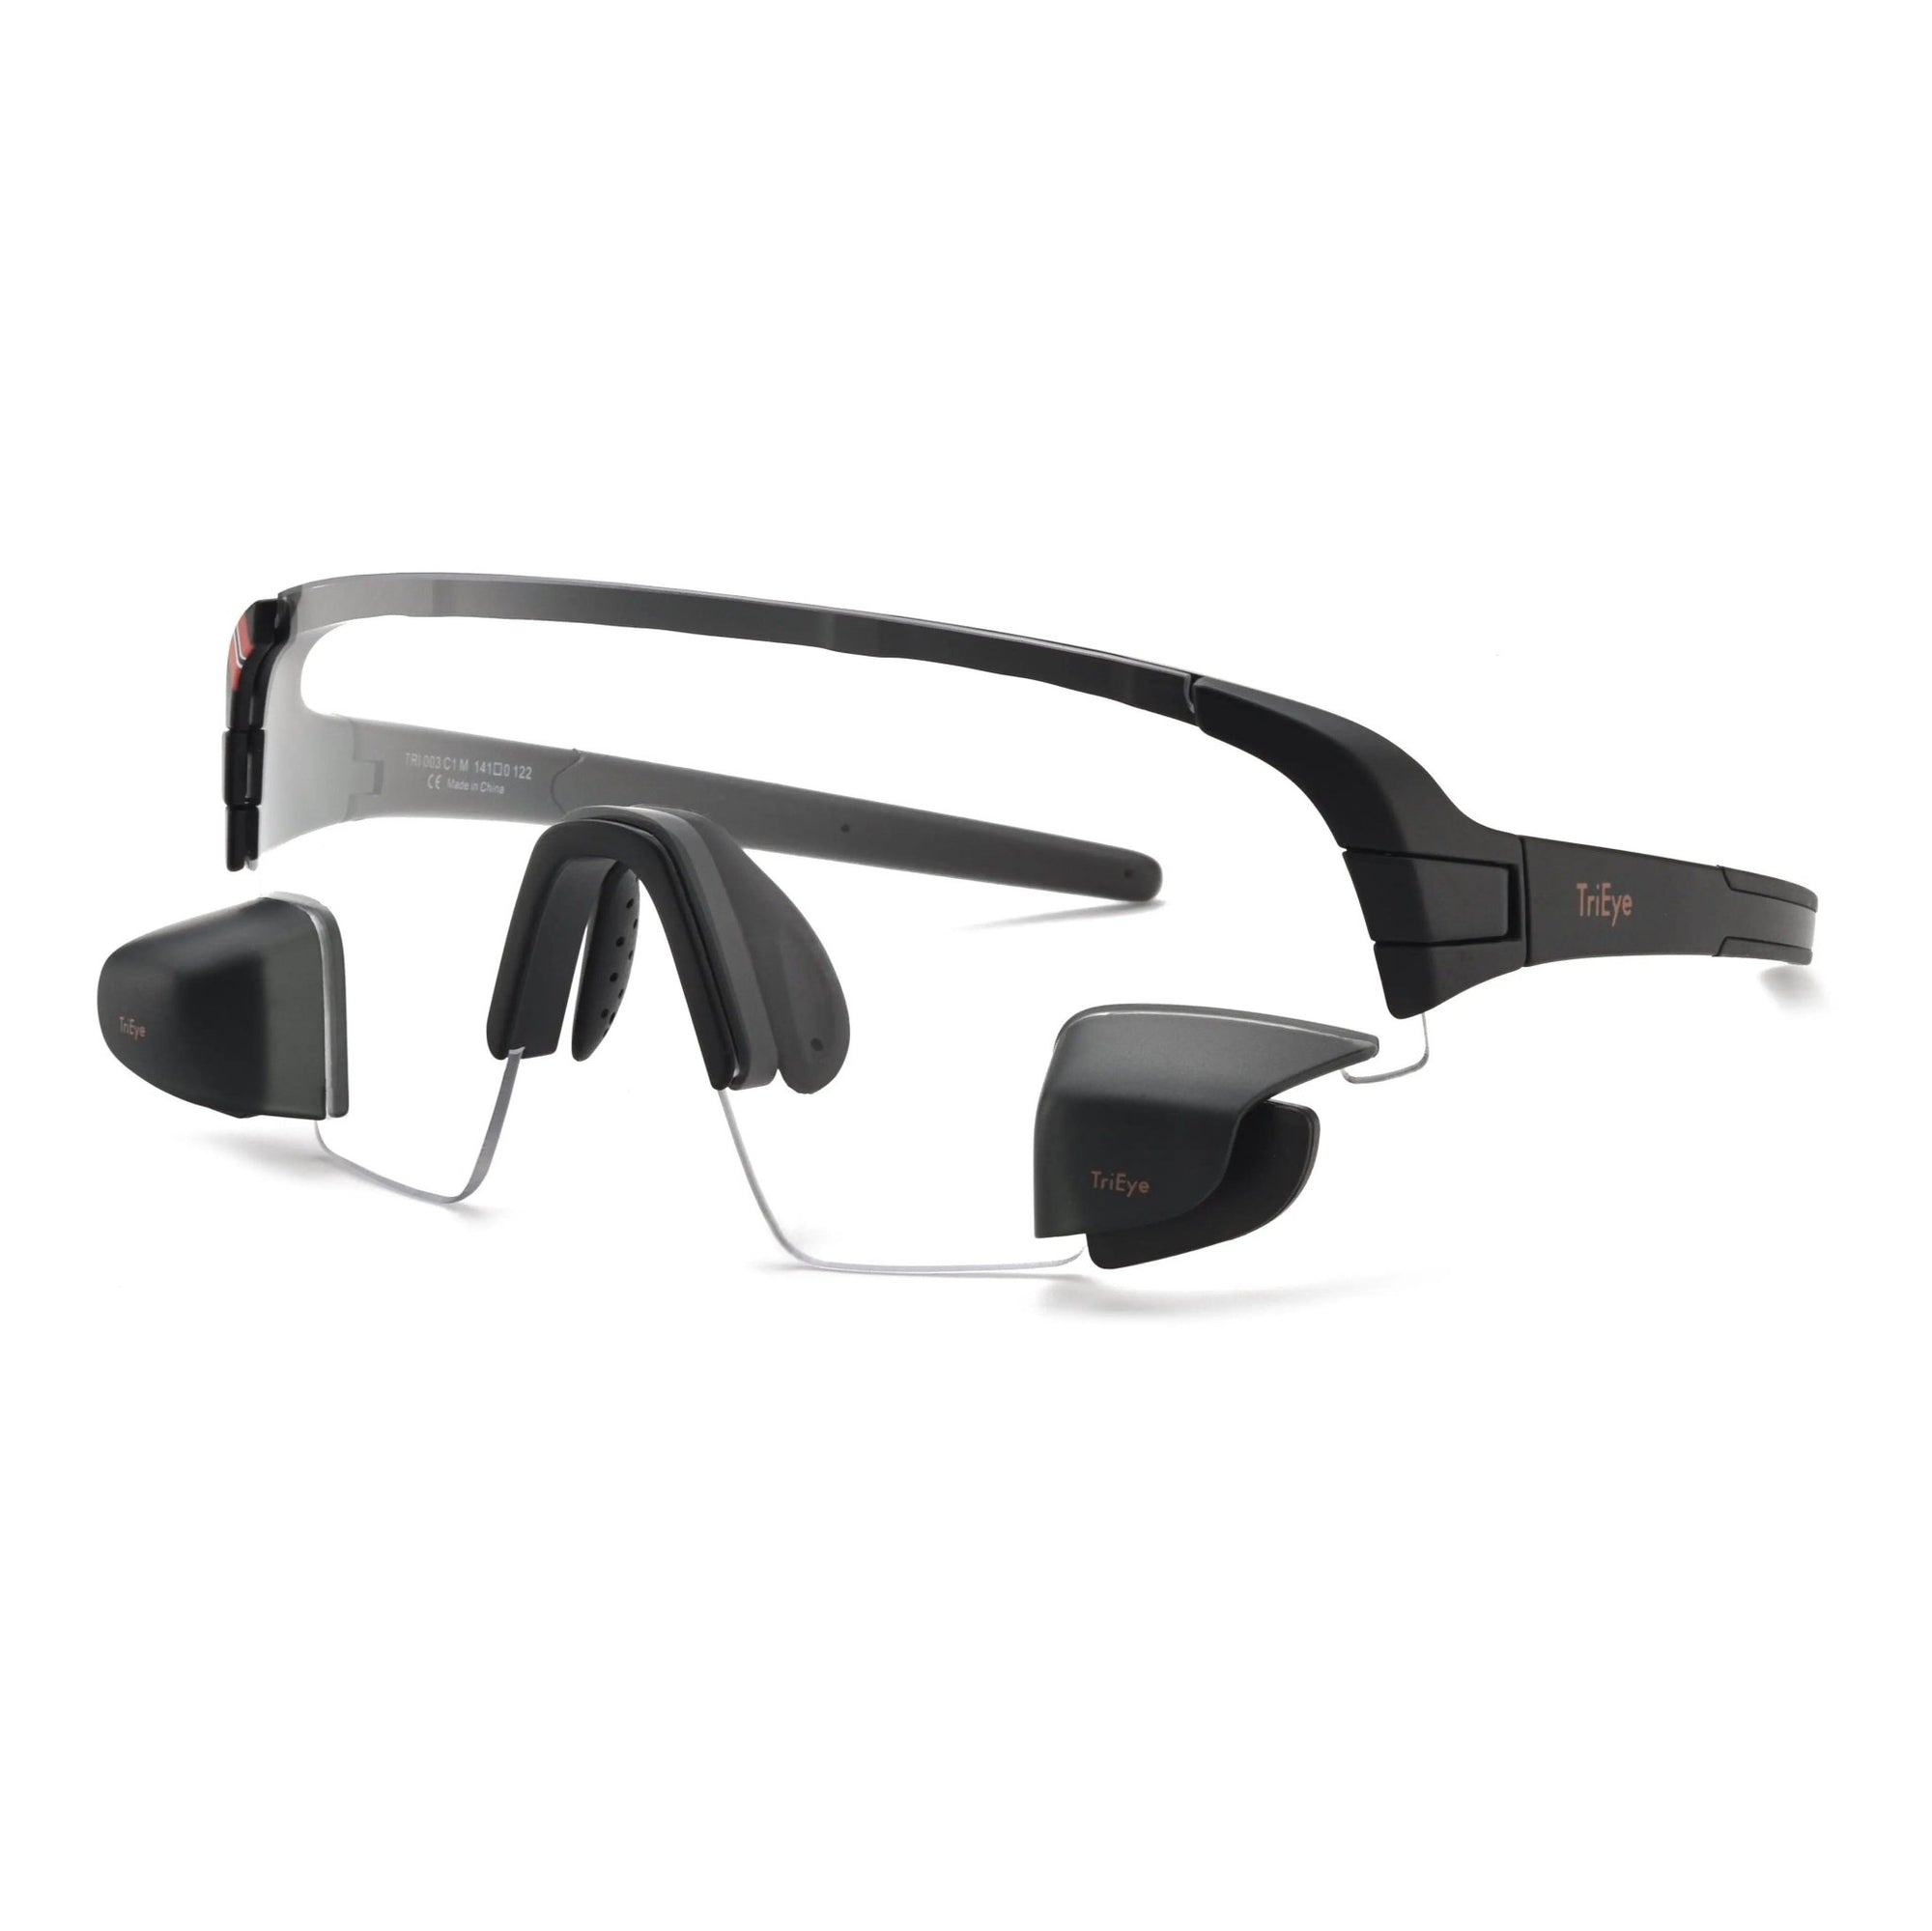 View Sport Dual Standard - Mirror Glasses for Rowing - TriEye Small / Dual / Black Clear